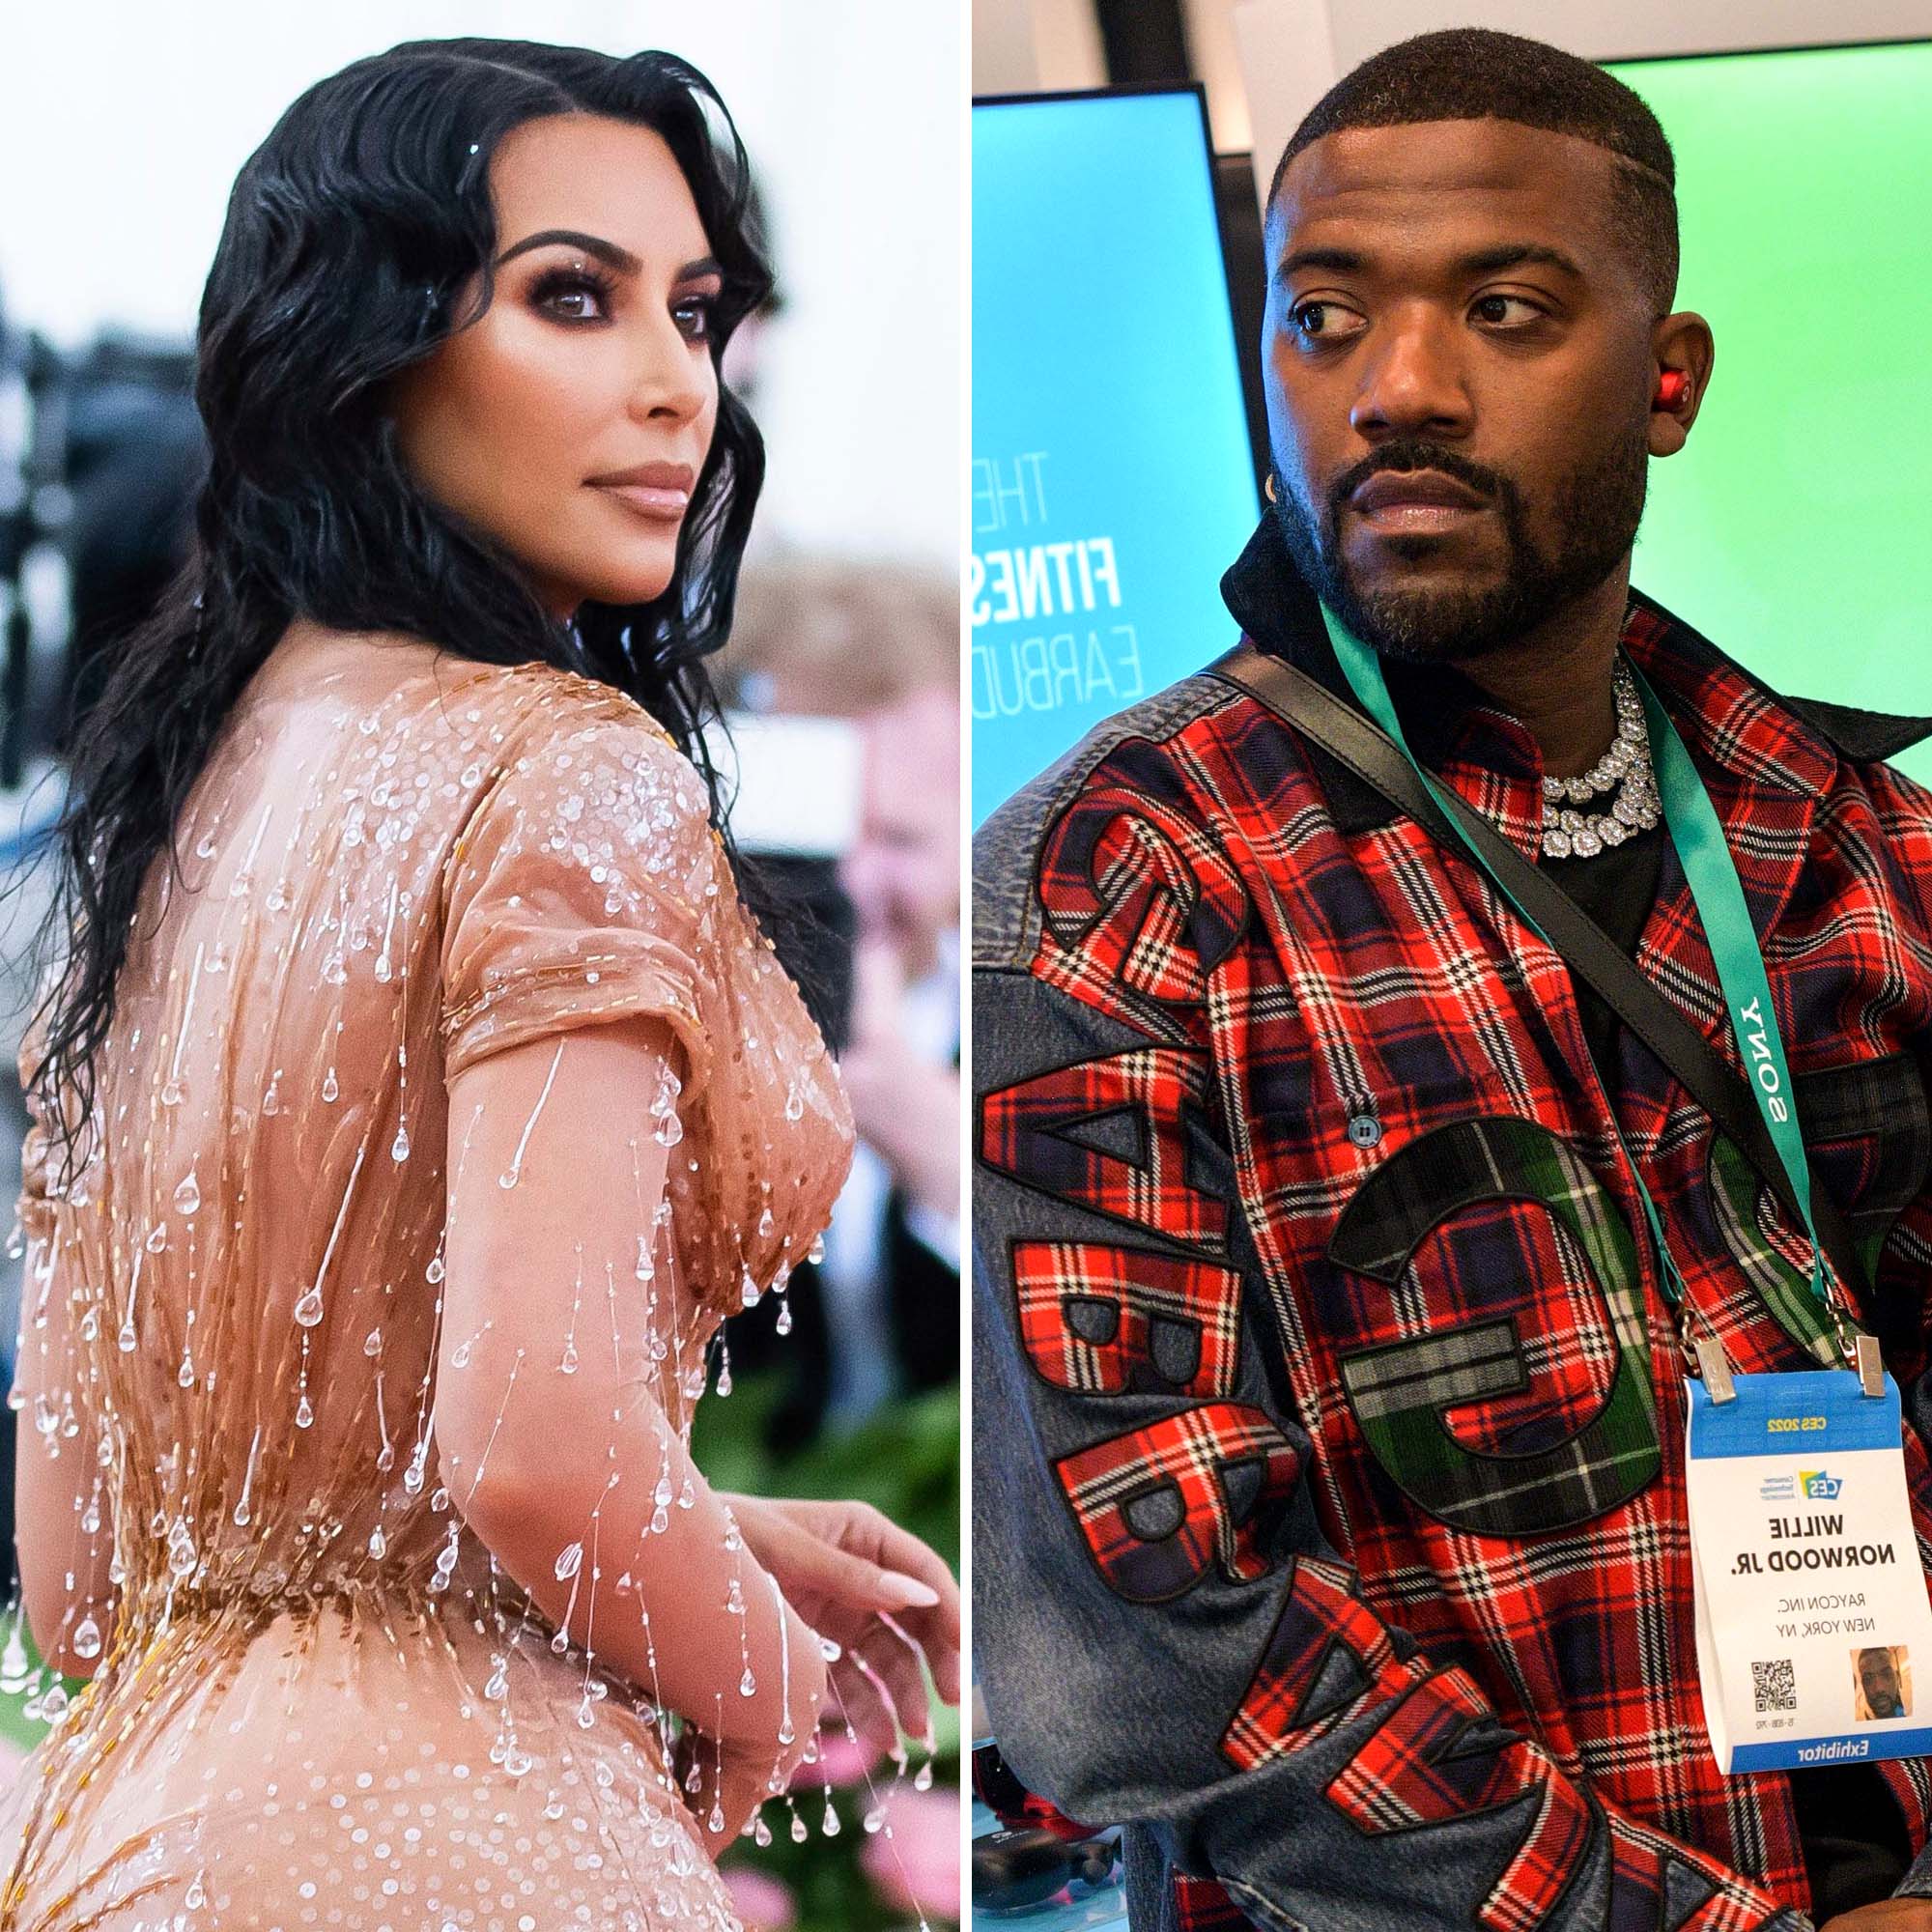 barry tuggle recommends kim and ray j full video pic